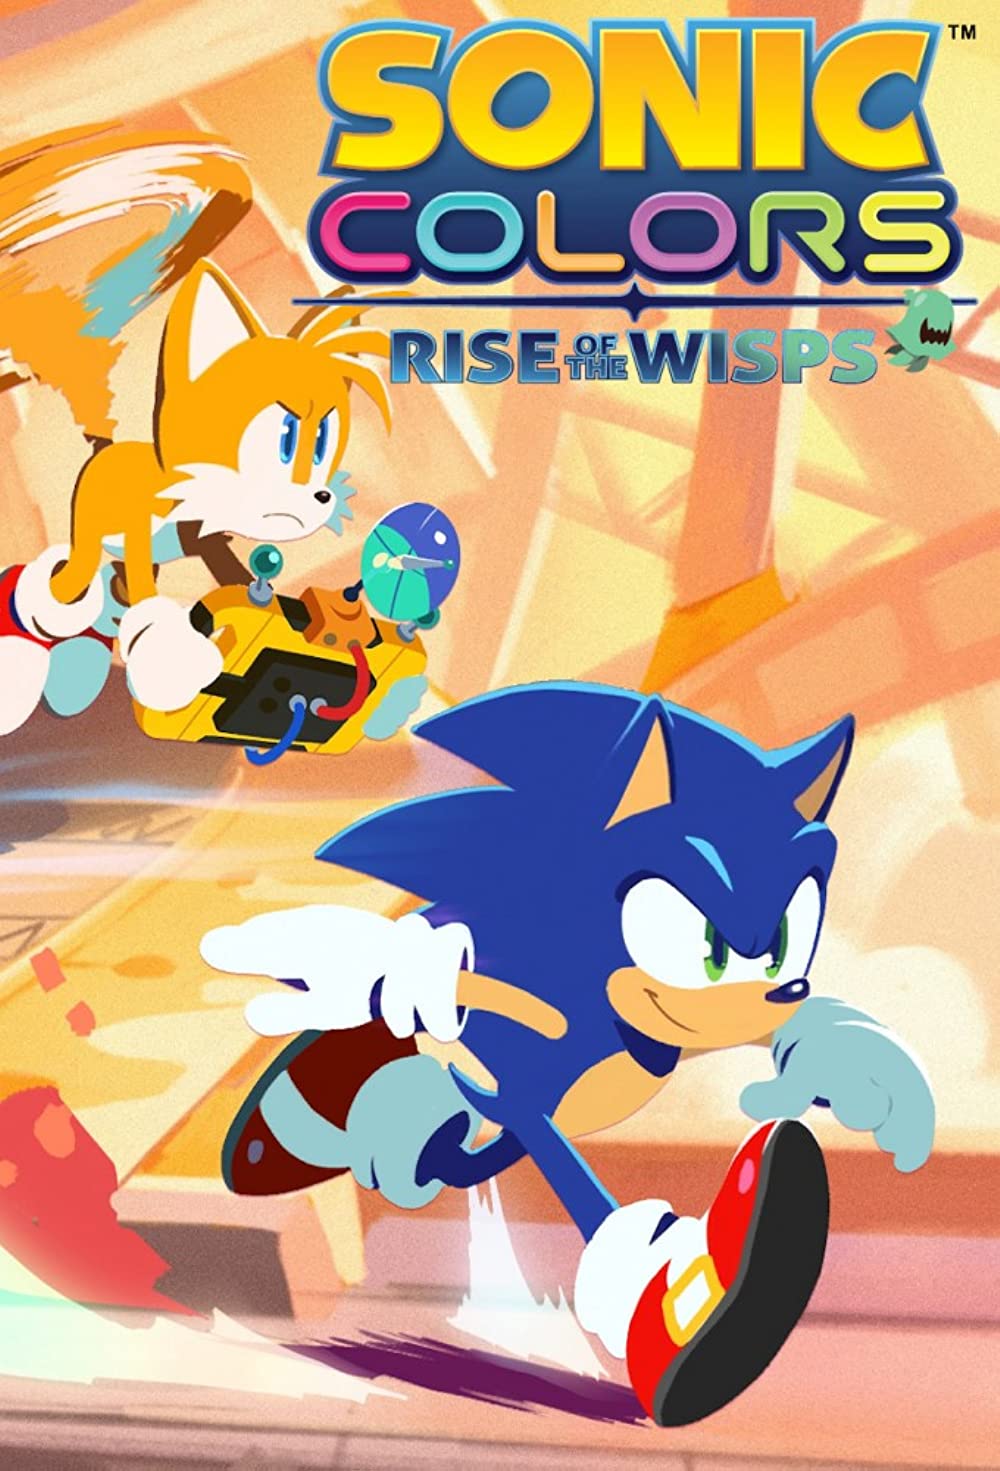 Sonic Colors: Rise of the Wisps (TV Mini Series 2021)